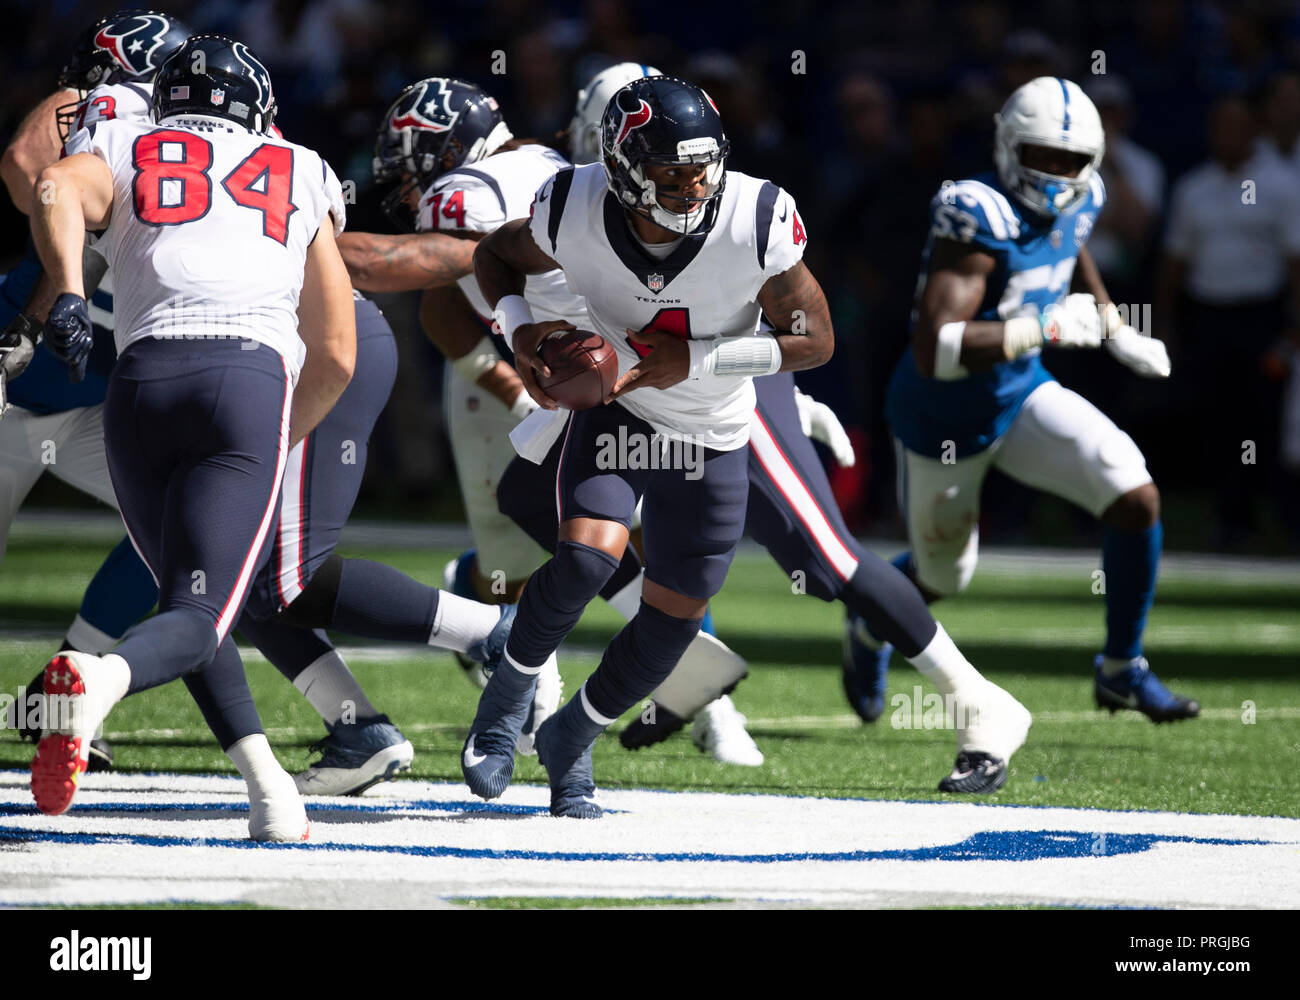 September 30, 2018: Houston Texans quarterback Deshaun Watson (4) pivots with the ball during NFL football game action between the Houston Texans and the Indianapolis Colts at Lucas Oil Stadium in Indianapolis, Indiana. Houston defeated Indianapolis 37-34 in overtime. John Mersits/CSM. Stock Photo